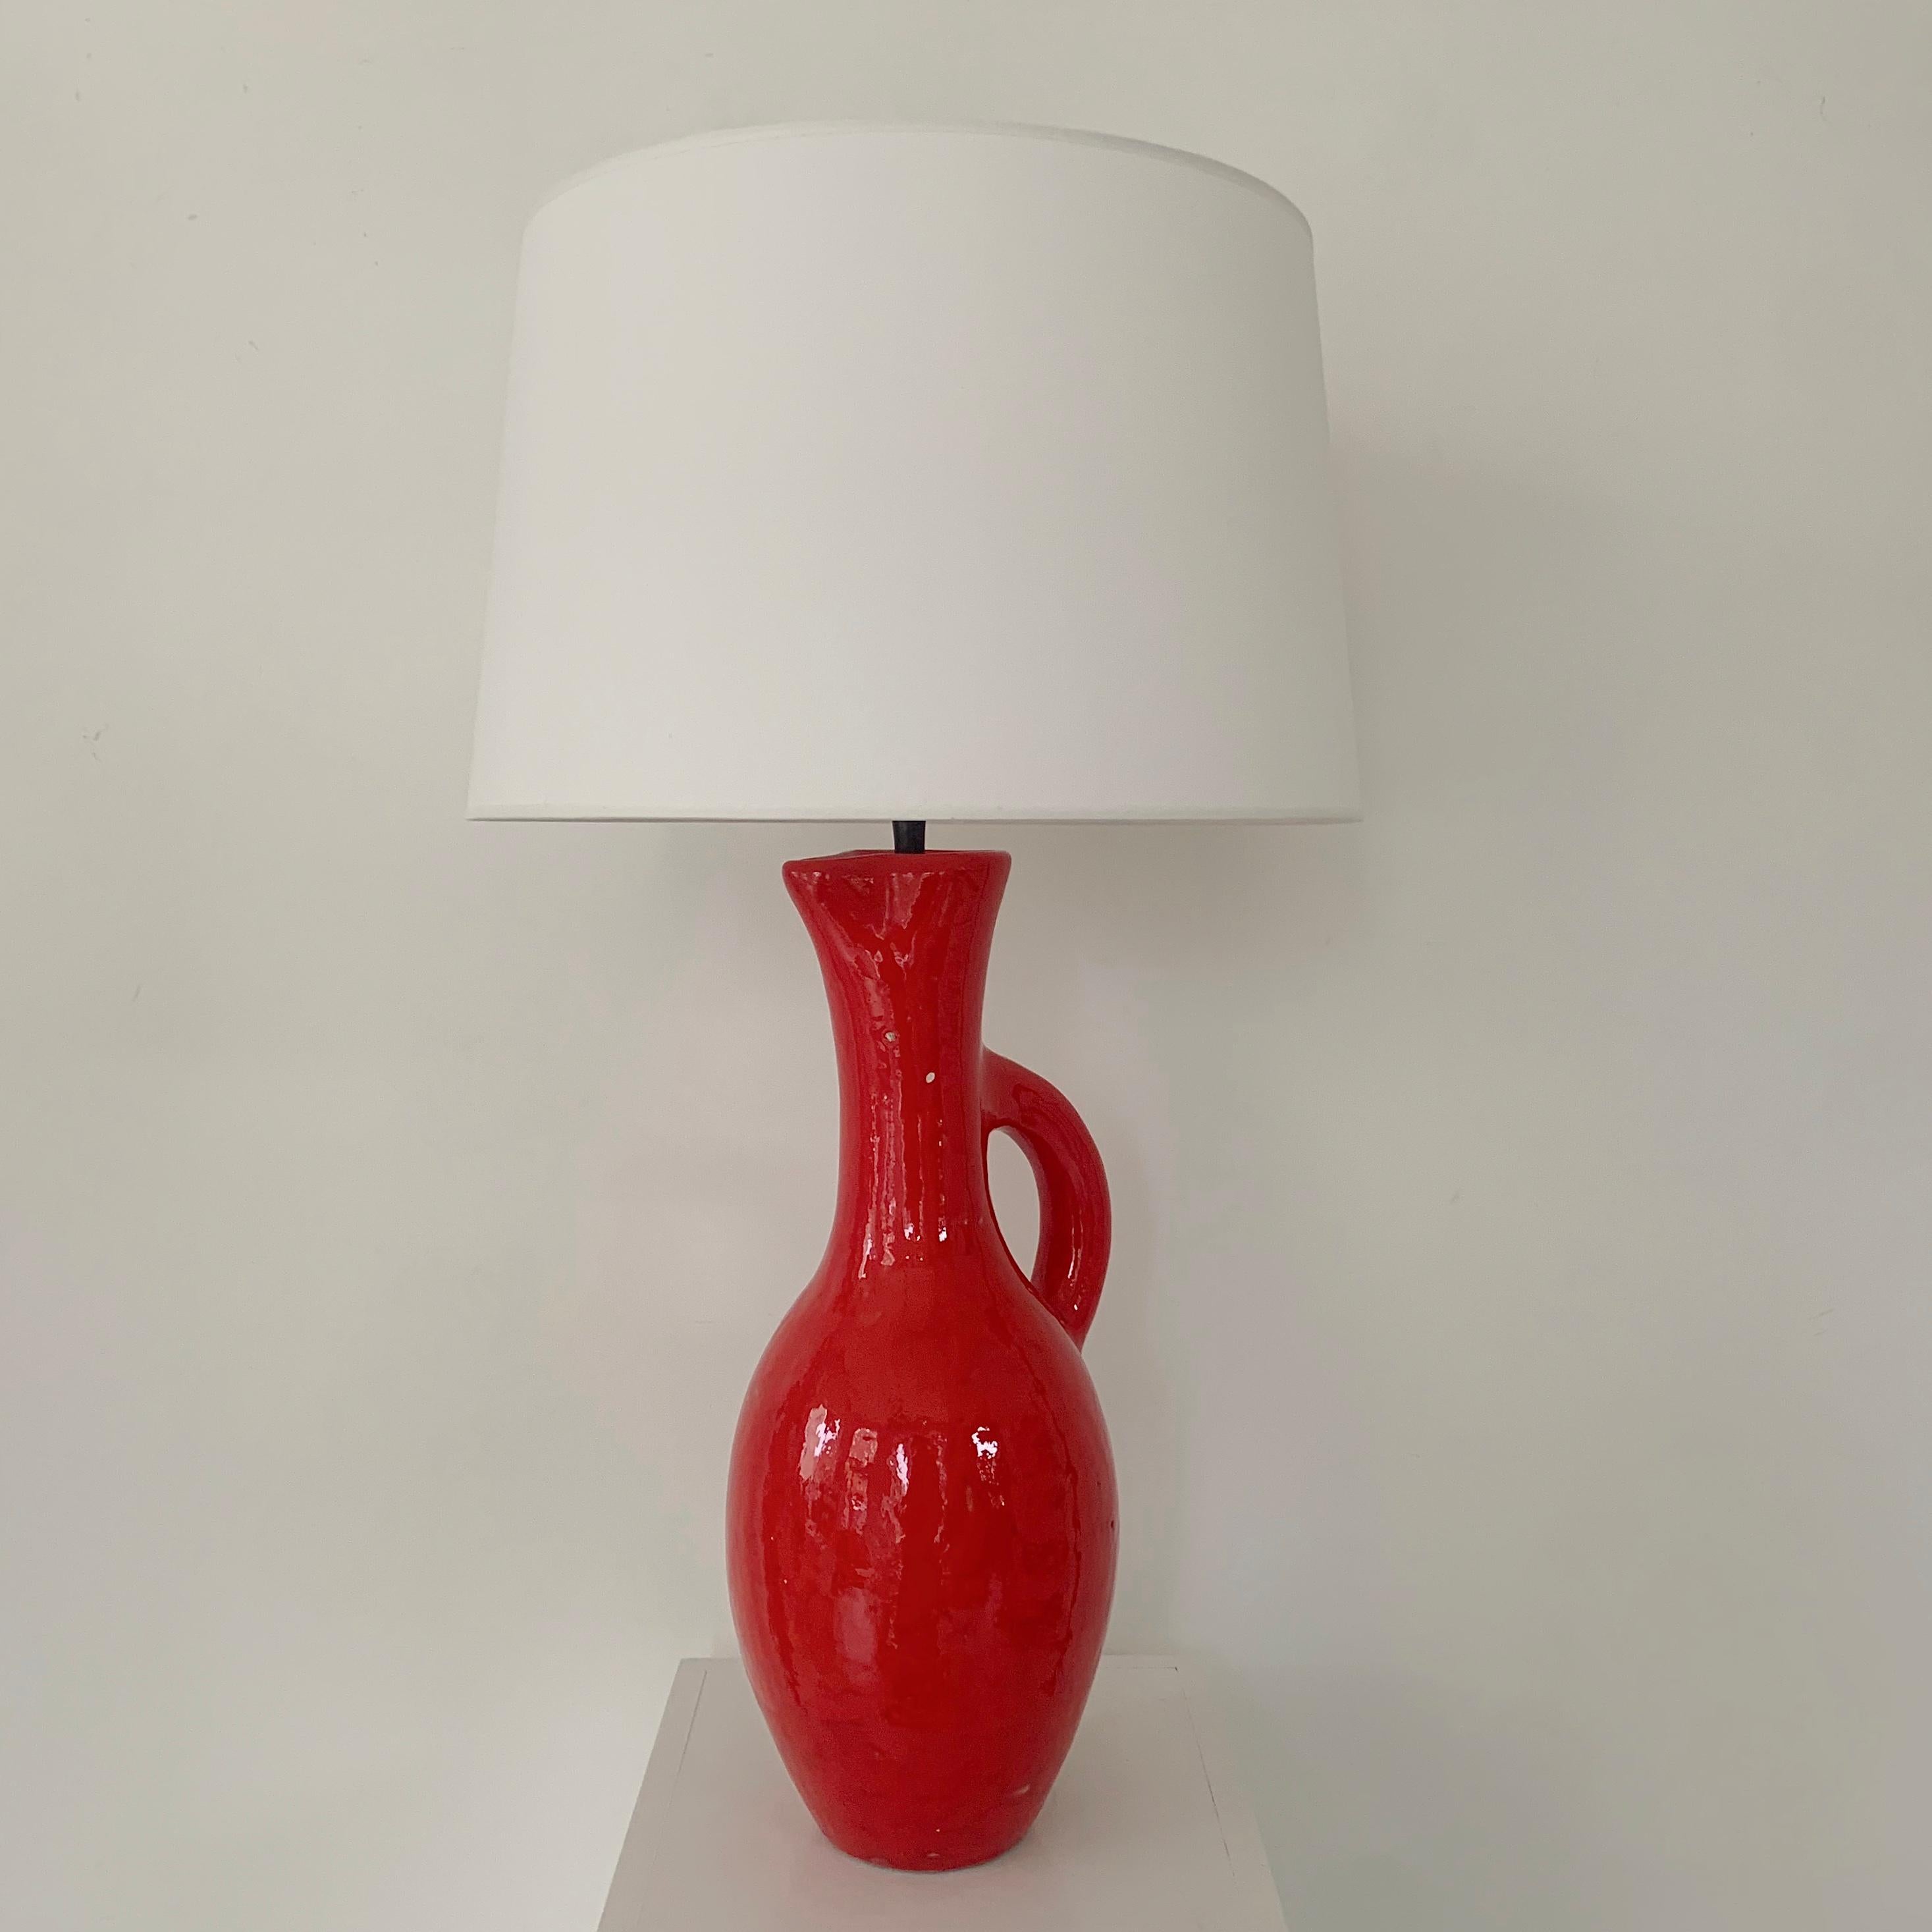 Mid-20th Century Les Archanges/Gilbert Valentin Large Signed Table Lamp, 1950s, Vallauris.